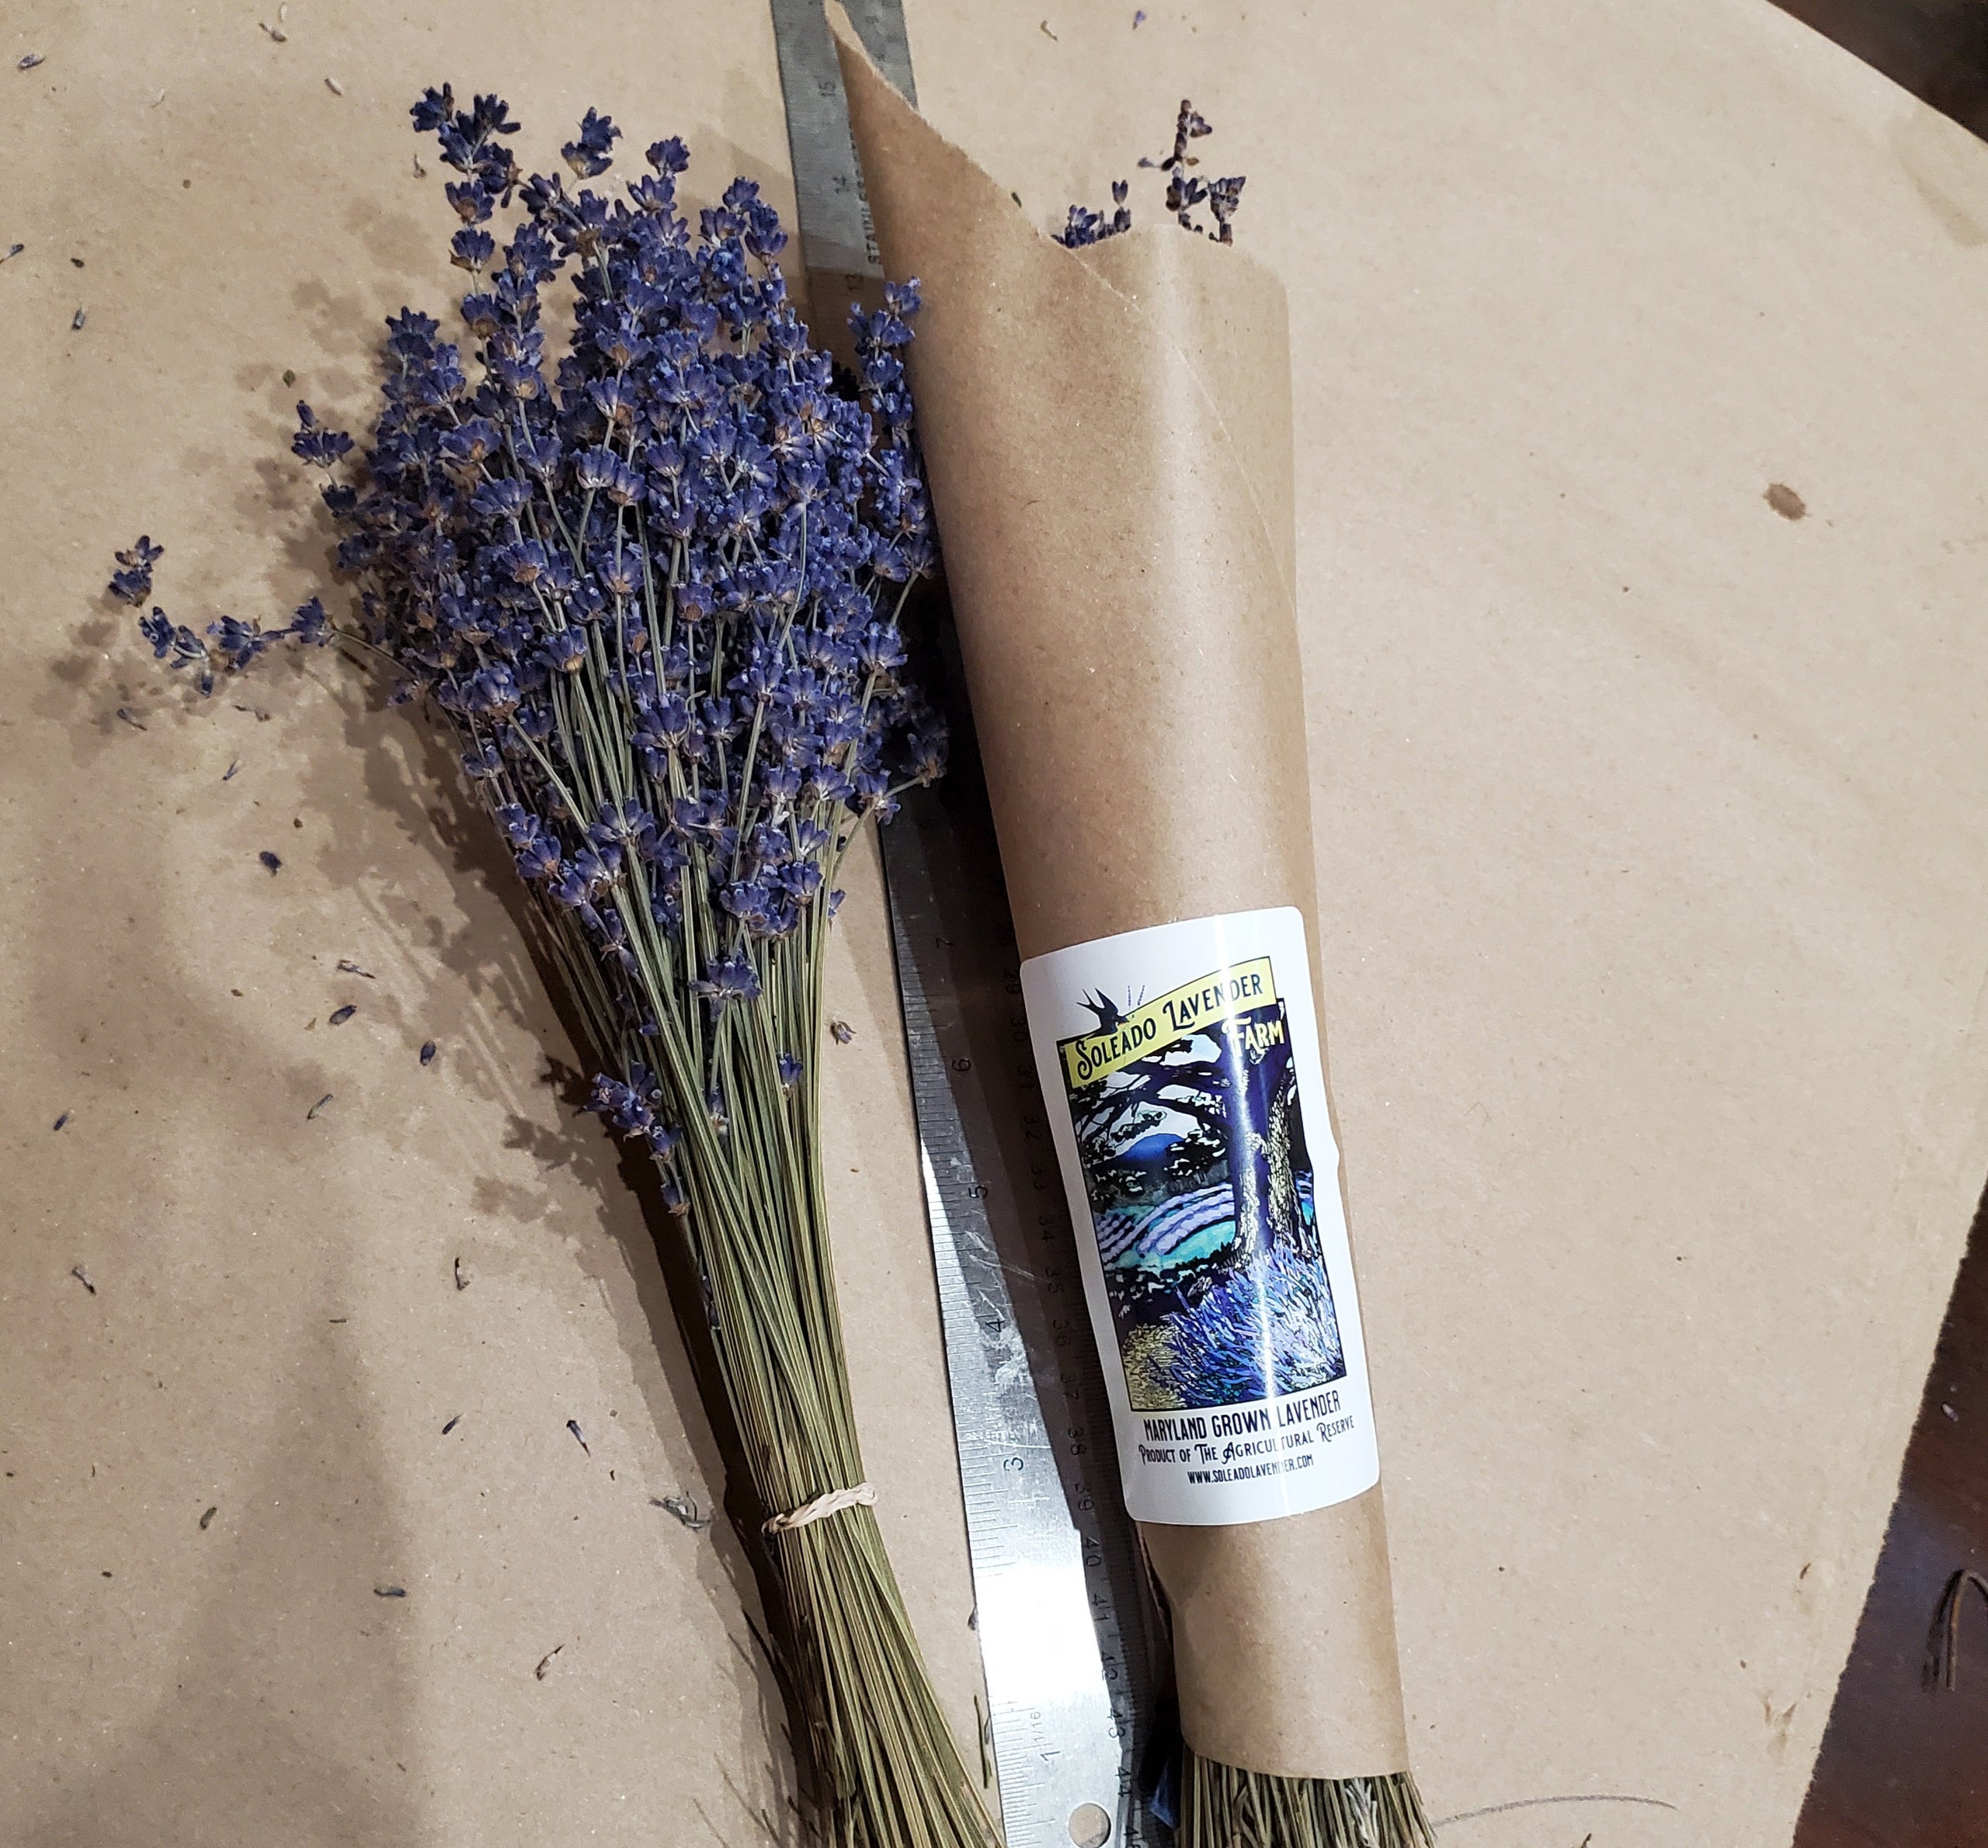 Dried Lavender Bouquets - English